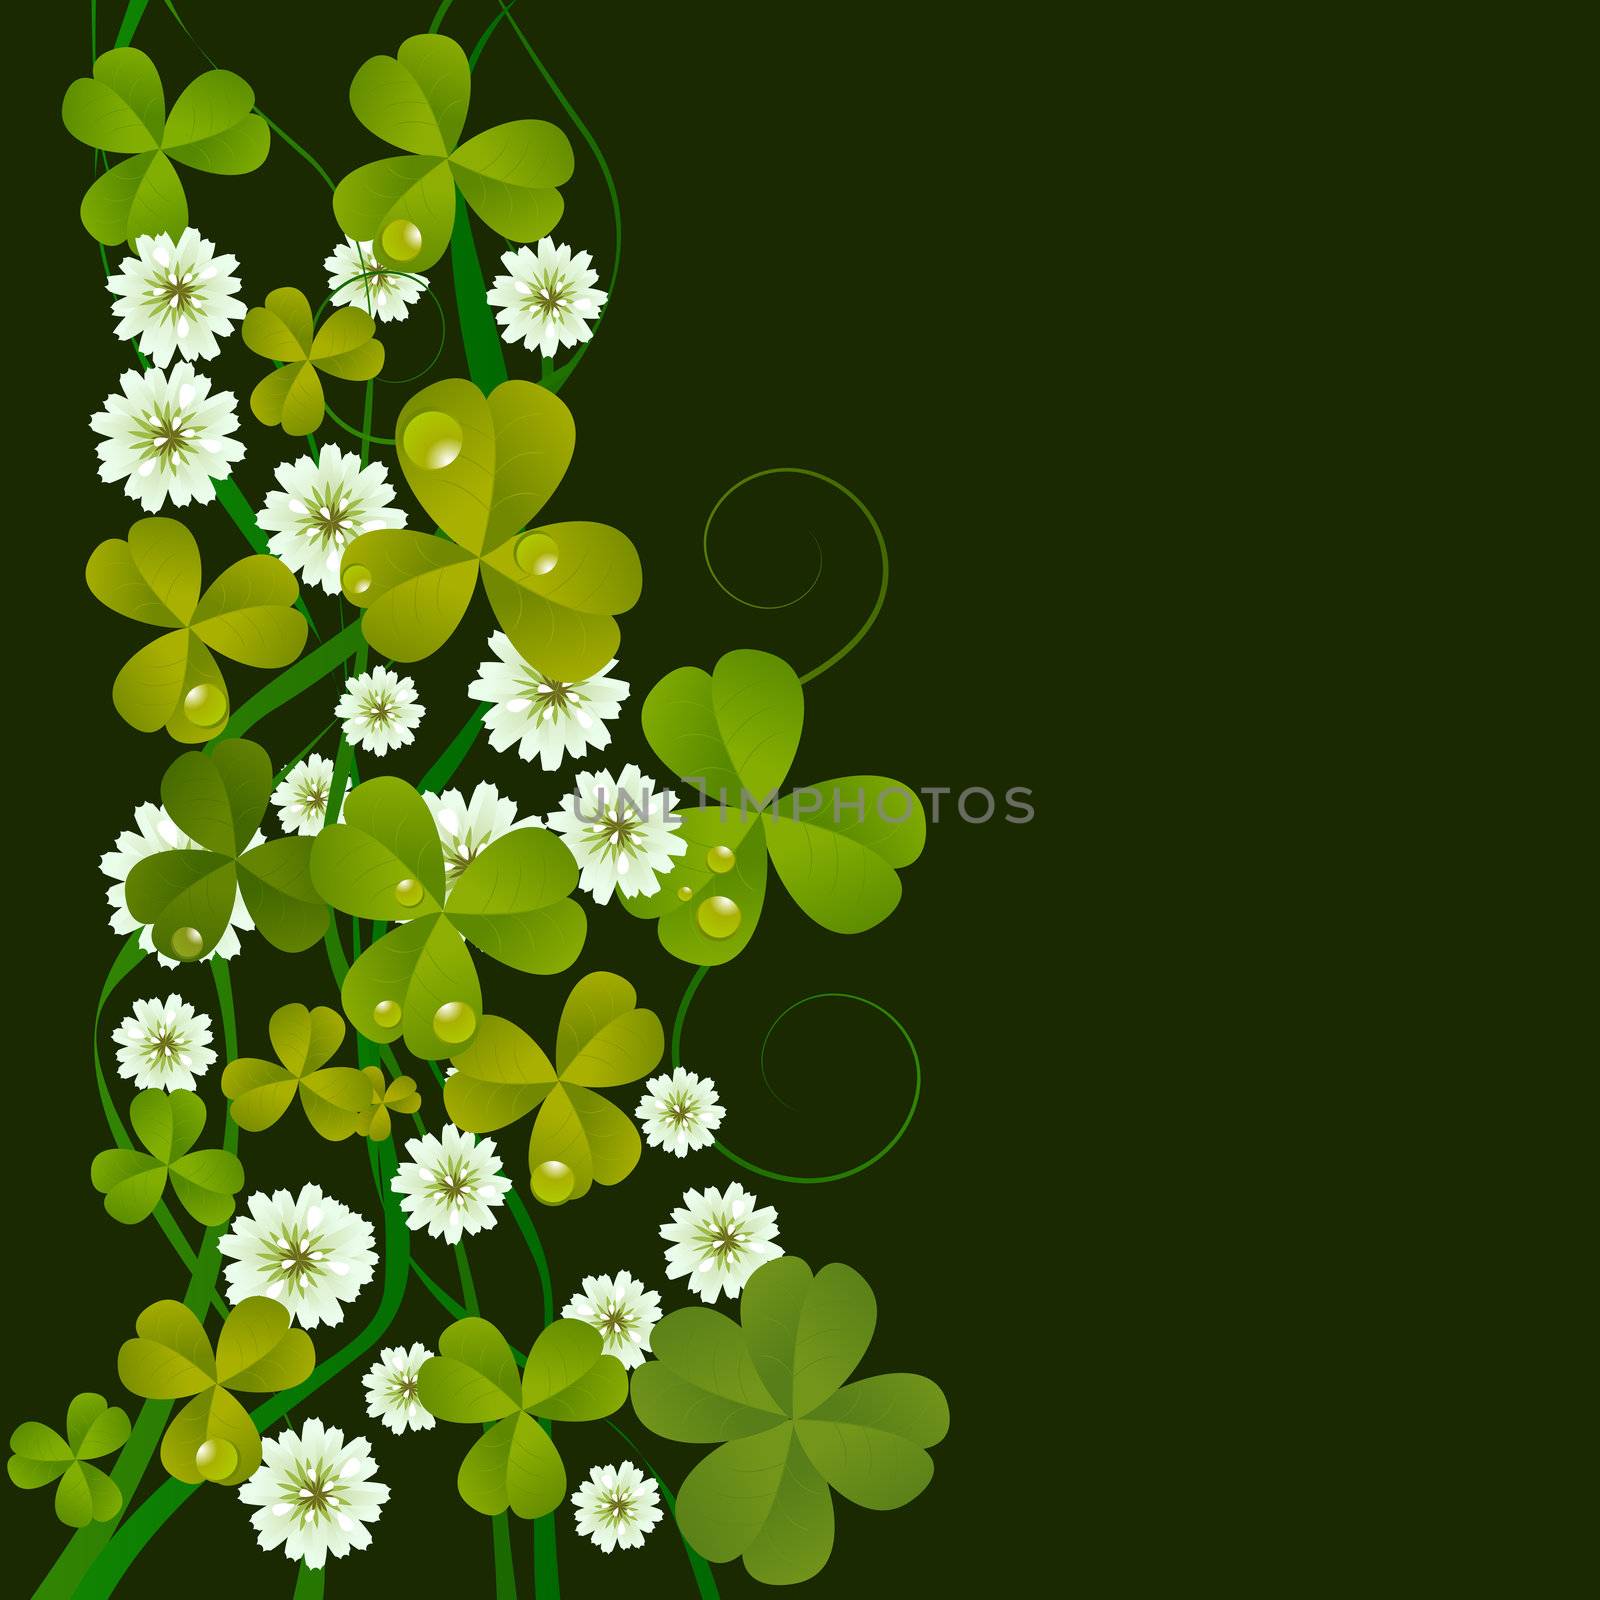 St. Patrick's Day card by Lirch